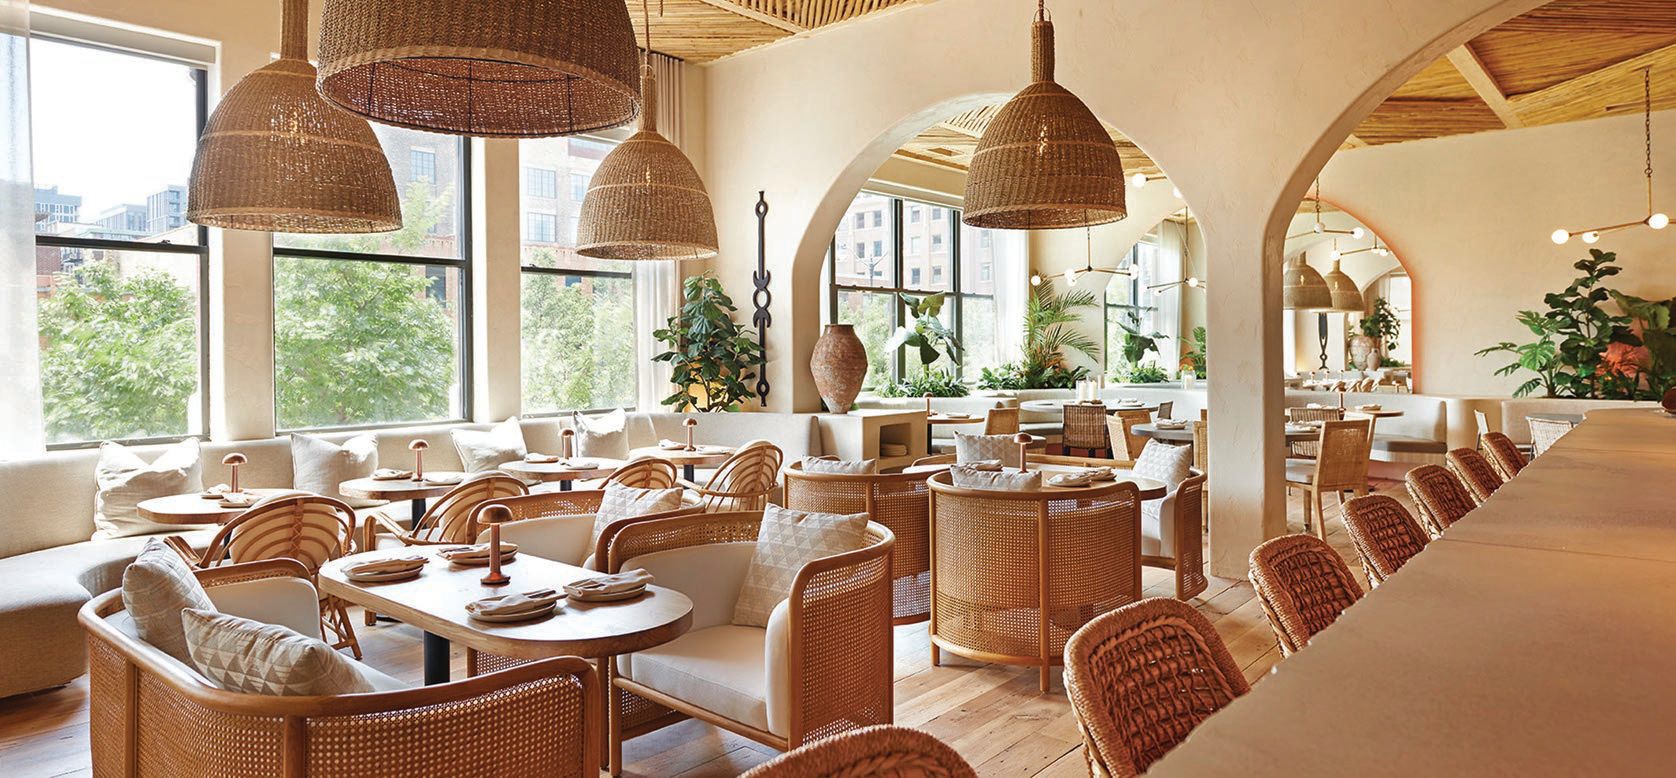 The dining room at Nisos boasts a sunny Mediterranean vibe PHOTO BY ANTHONY TAHLIER